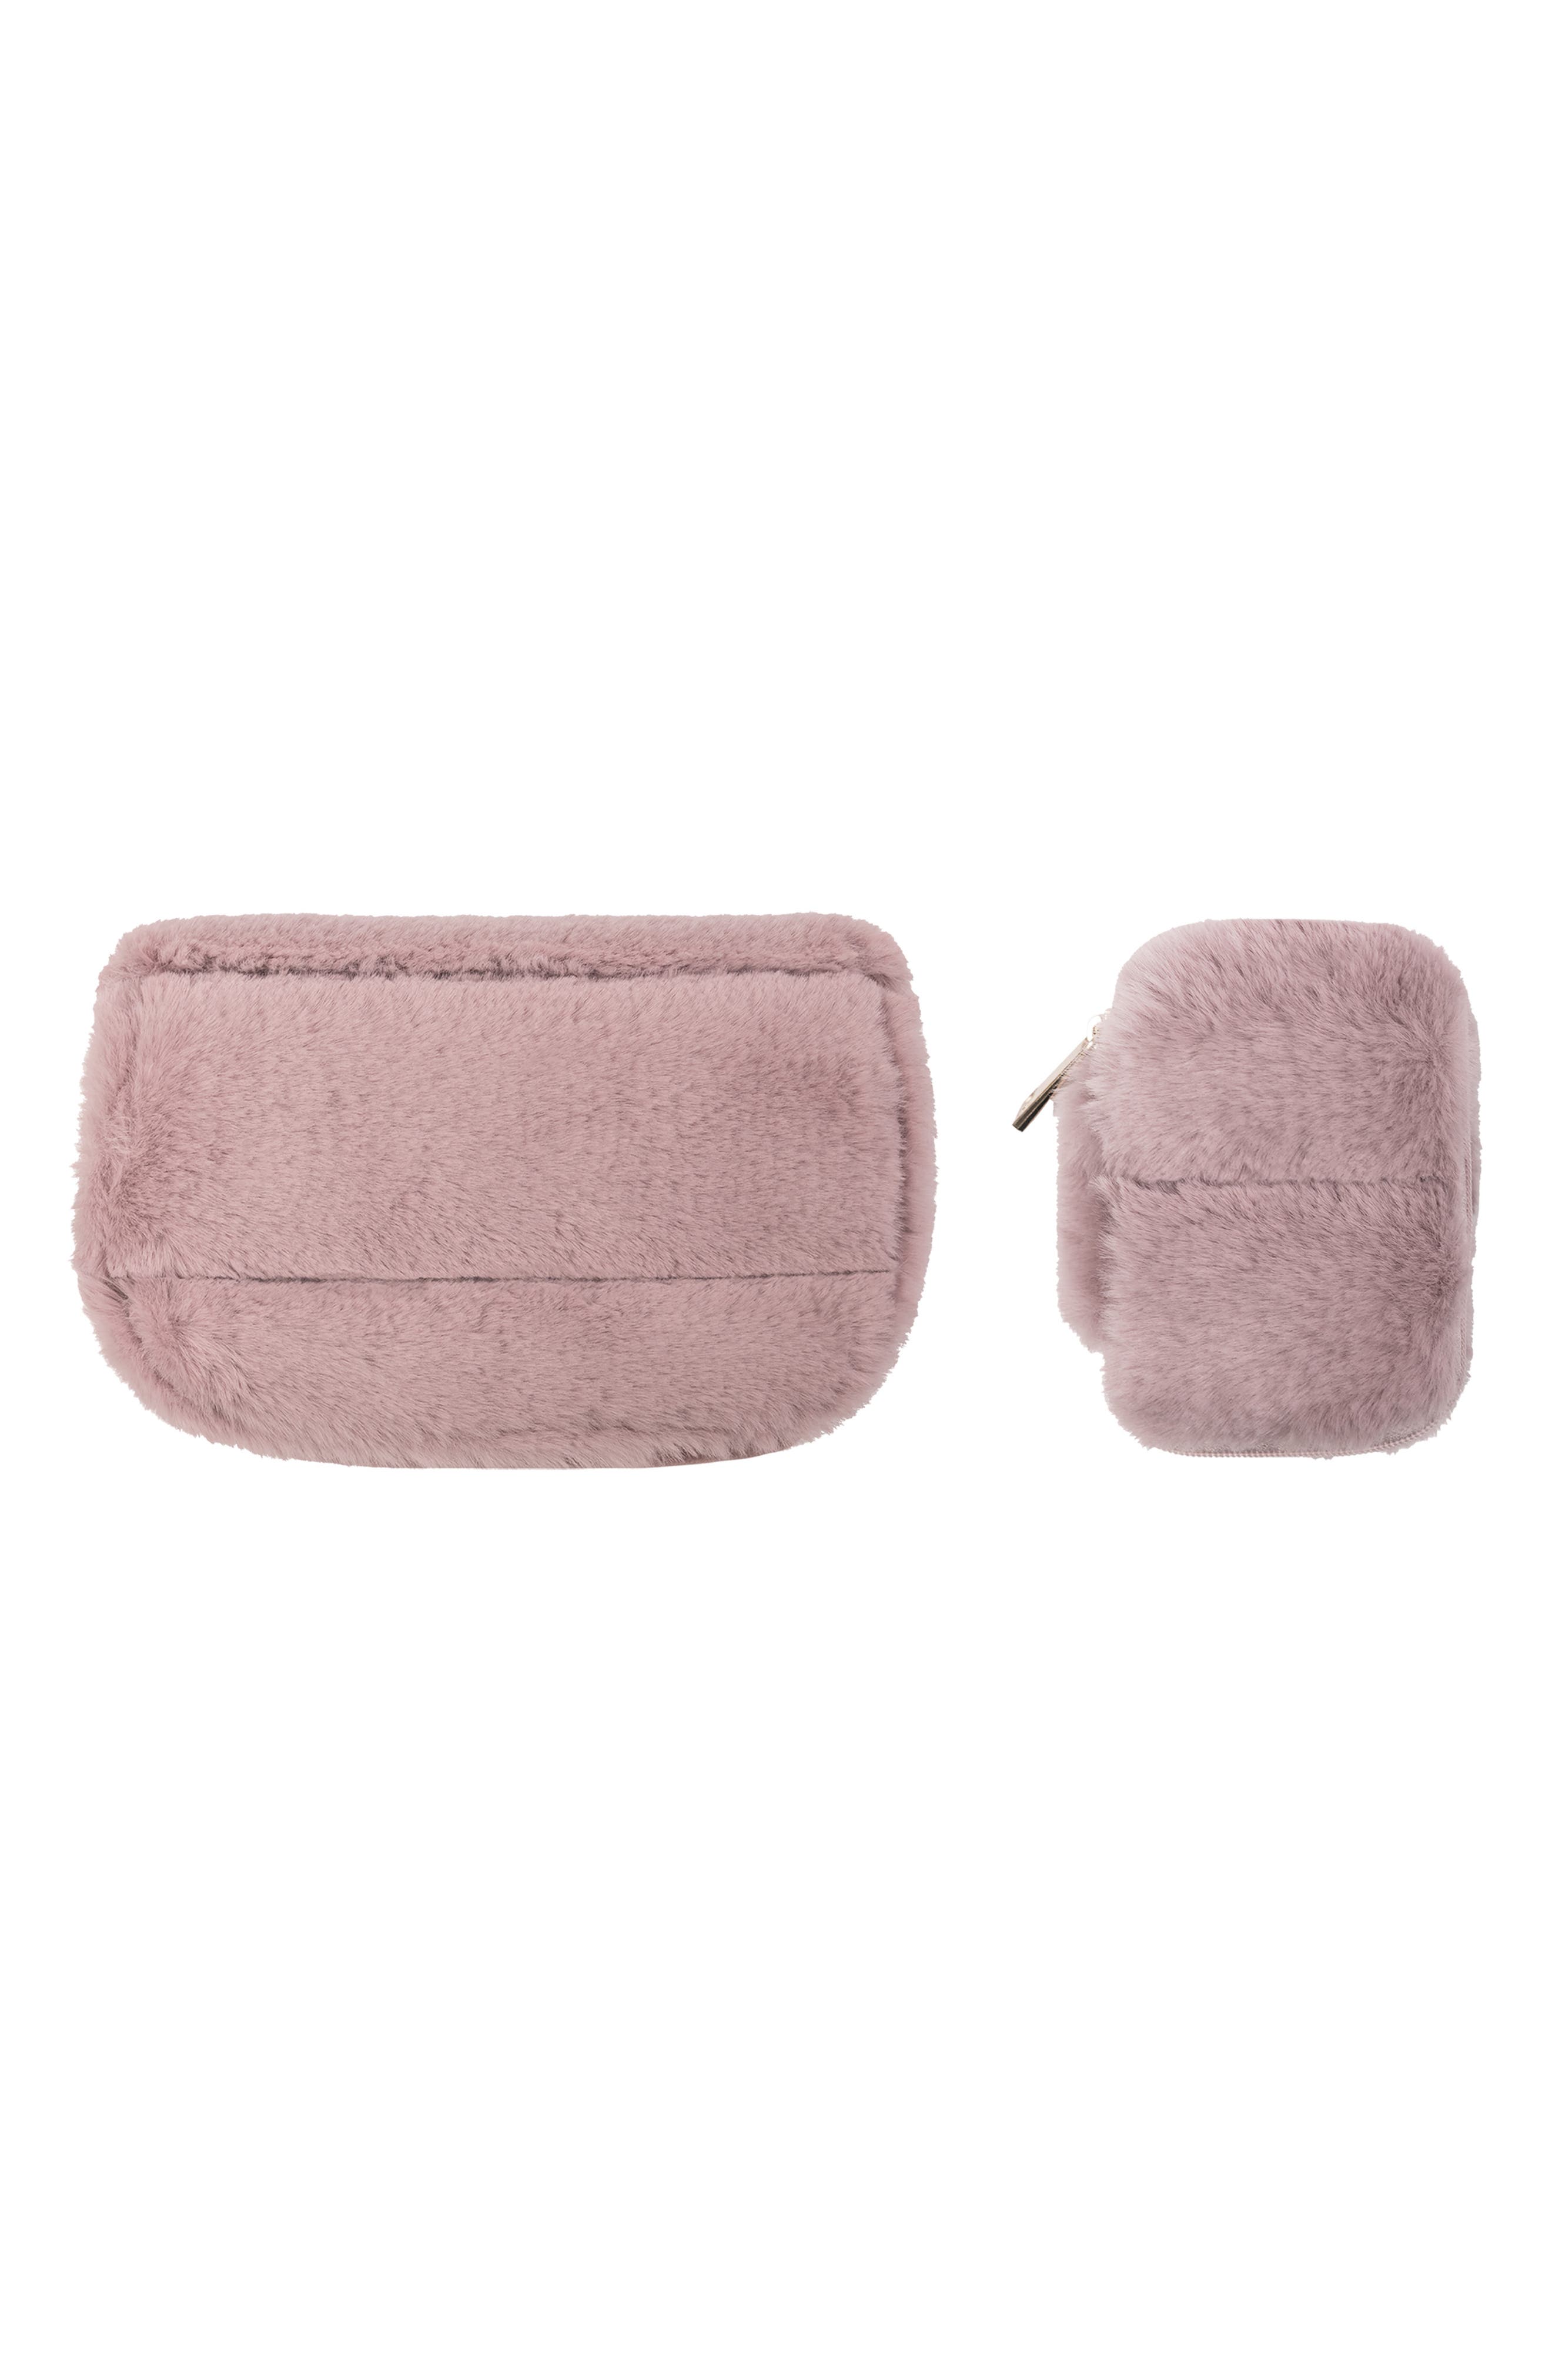 MYTAGALONGS Faux Fur Earbud & Tech Accessory Cases in Lilac